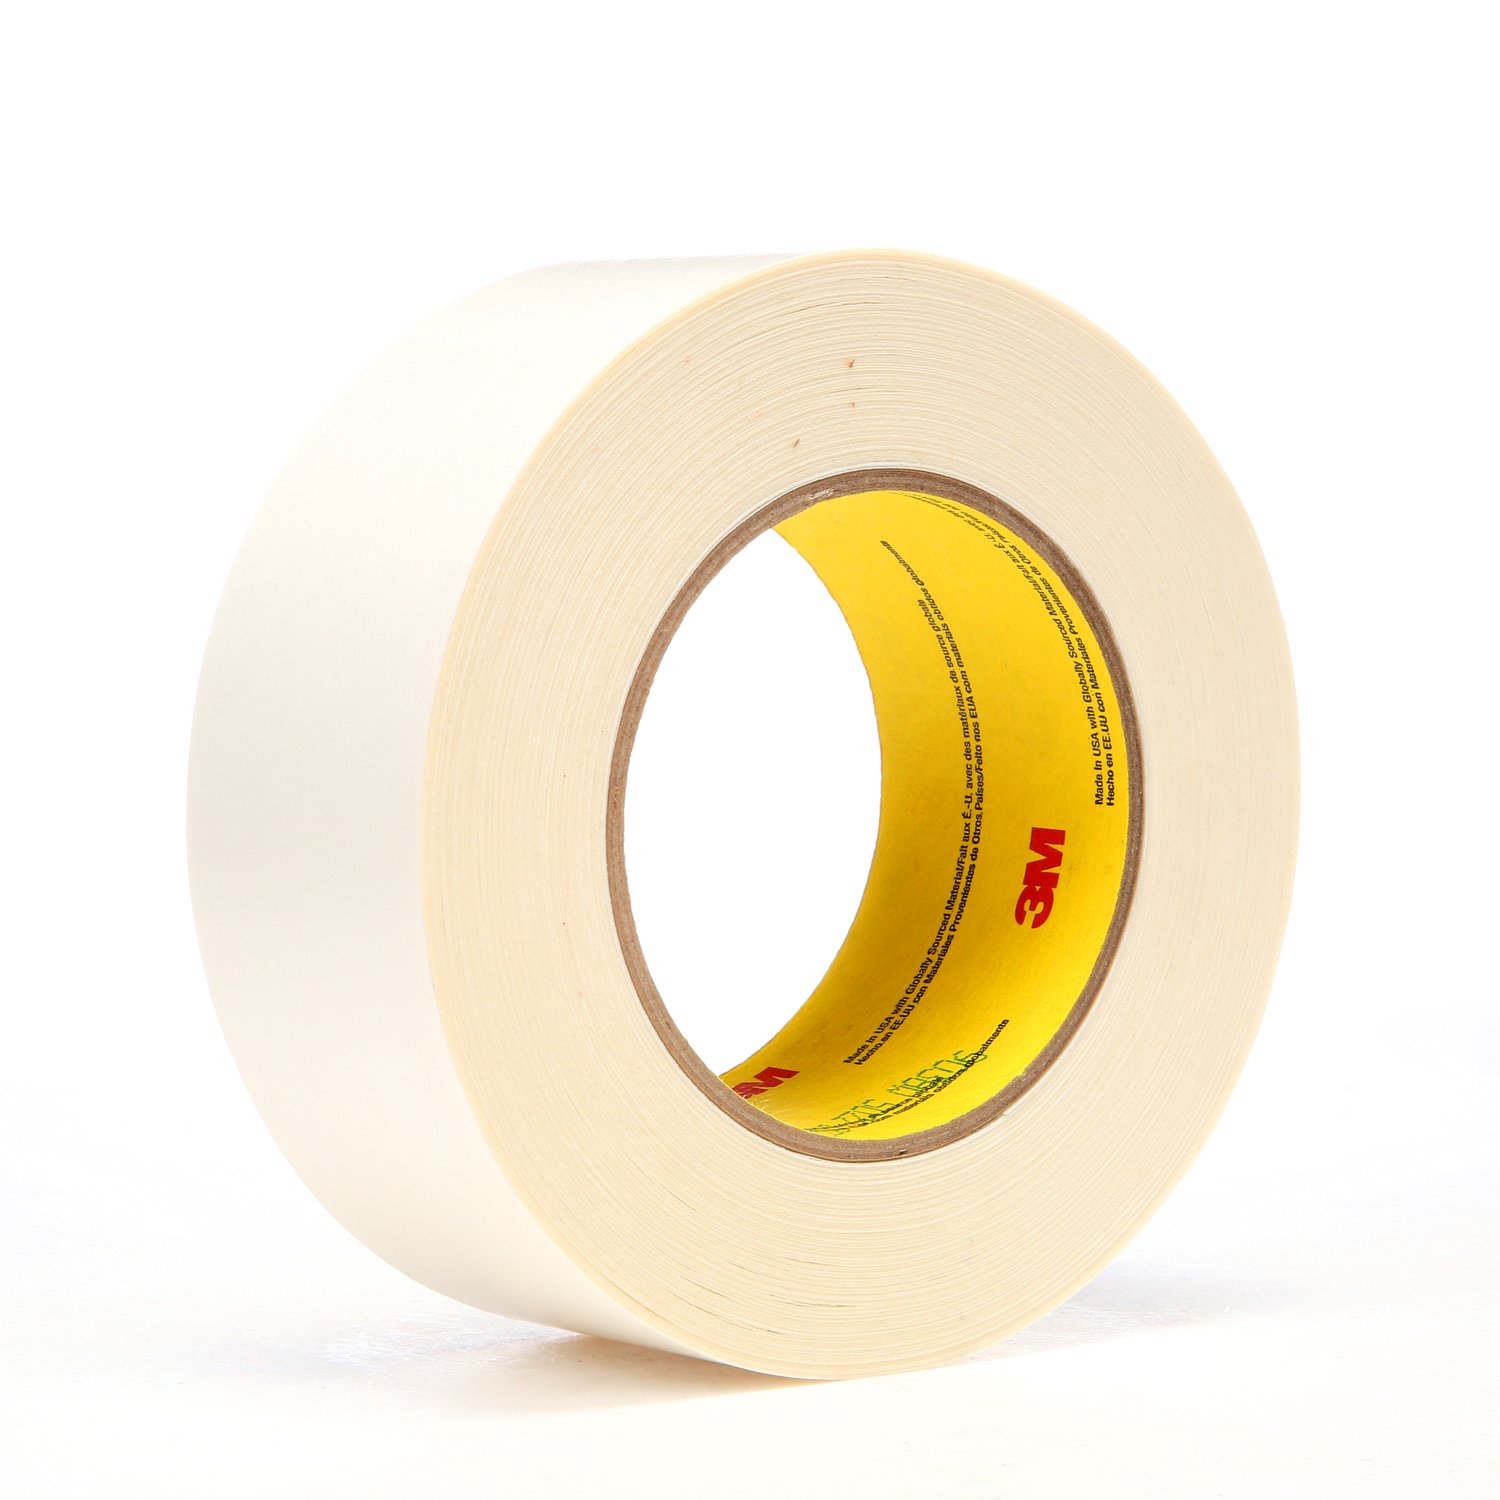 7100028067 - 3M Repulpable Double Coated Splicing Tape 9038W, White, 96 mm x 55 m, 3
mil, 8 rolls per case